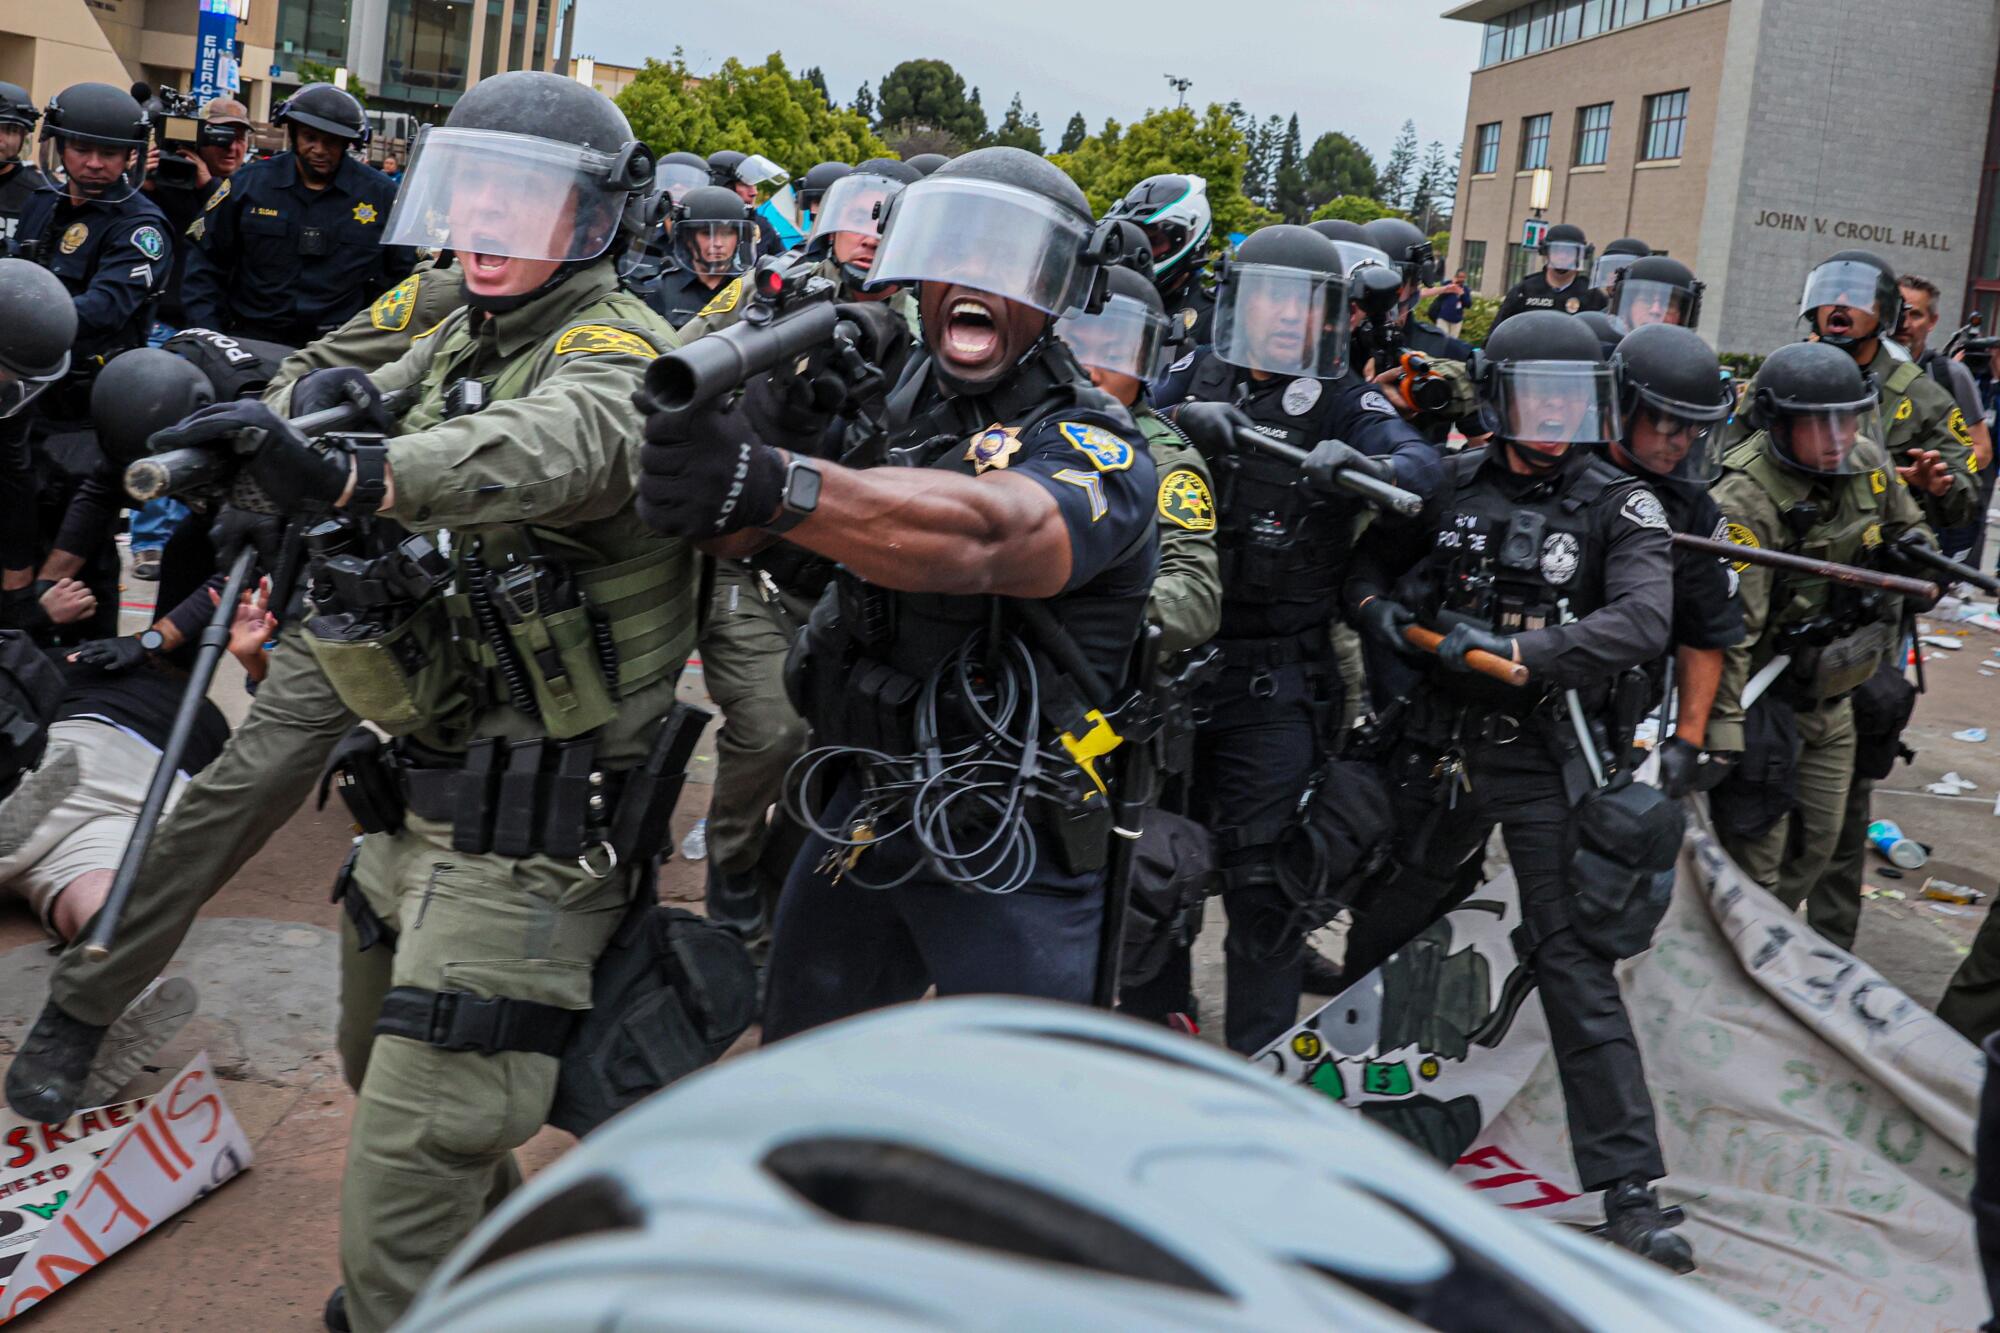 Officers in riot gear wielding various weapons and batons wade into a group of demonstrators.